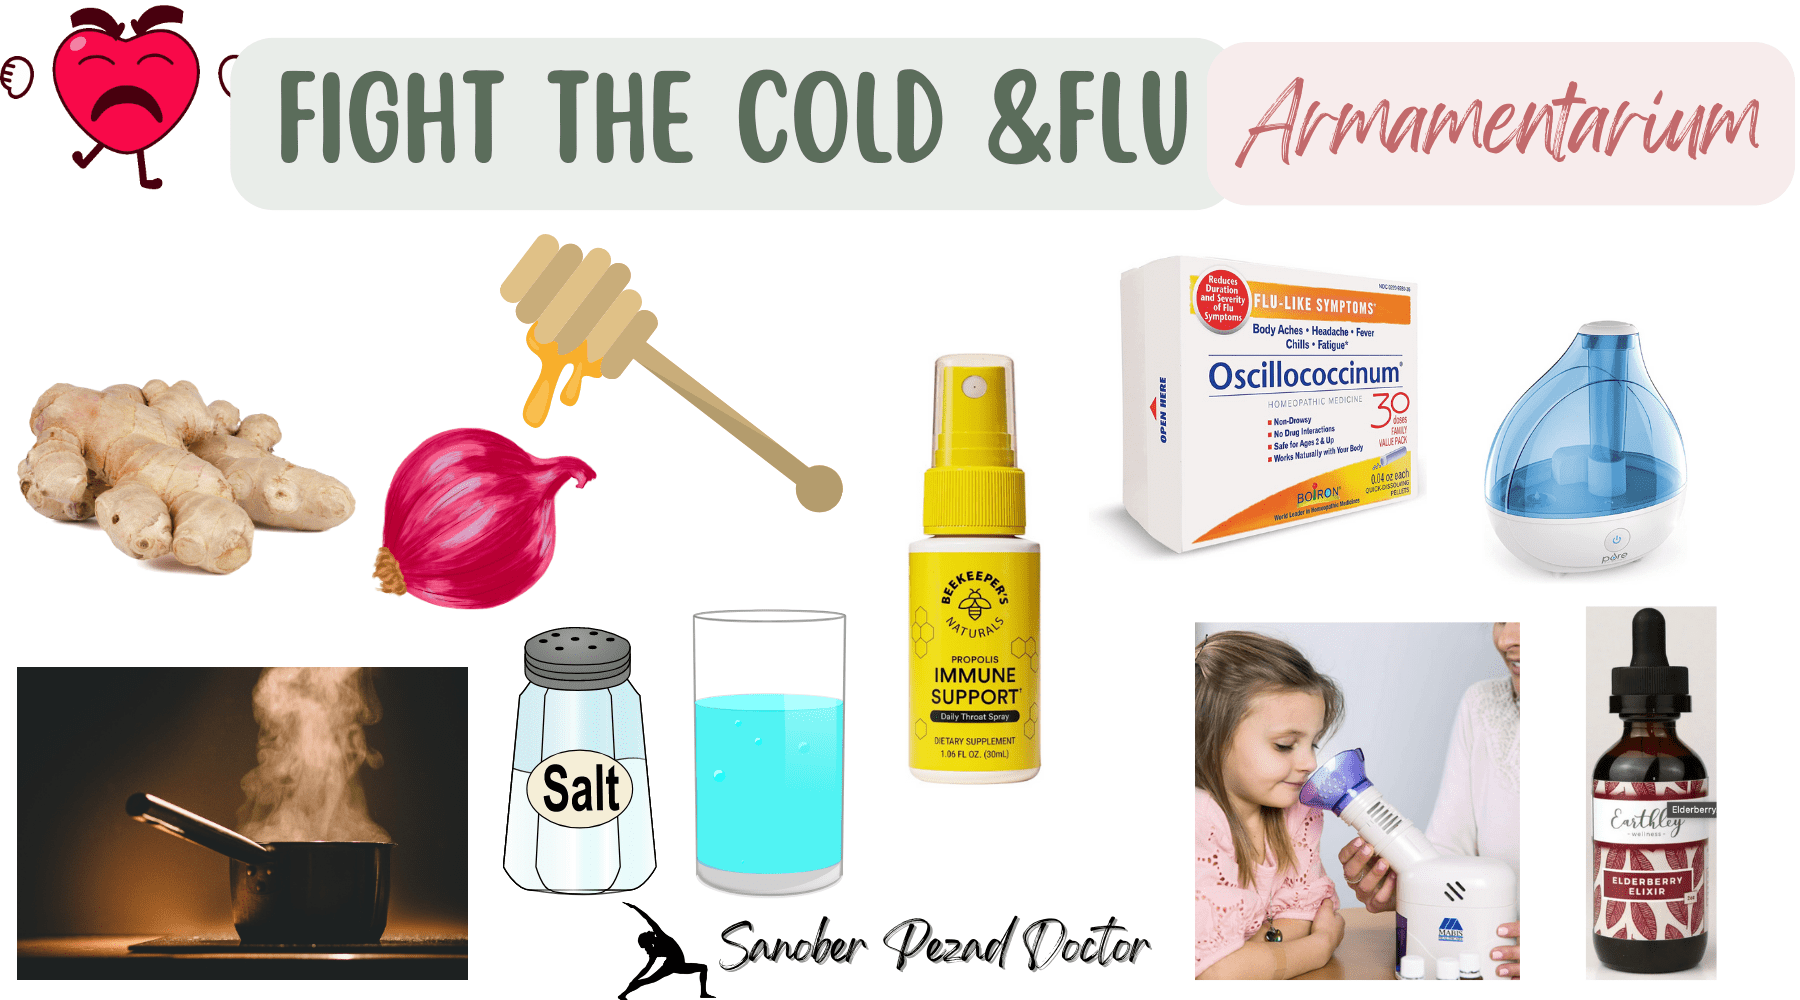 The Complete Cold & Flu Treatment Guide: Homemade Remedies + Firstaid Kit